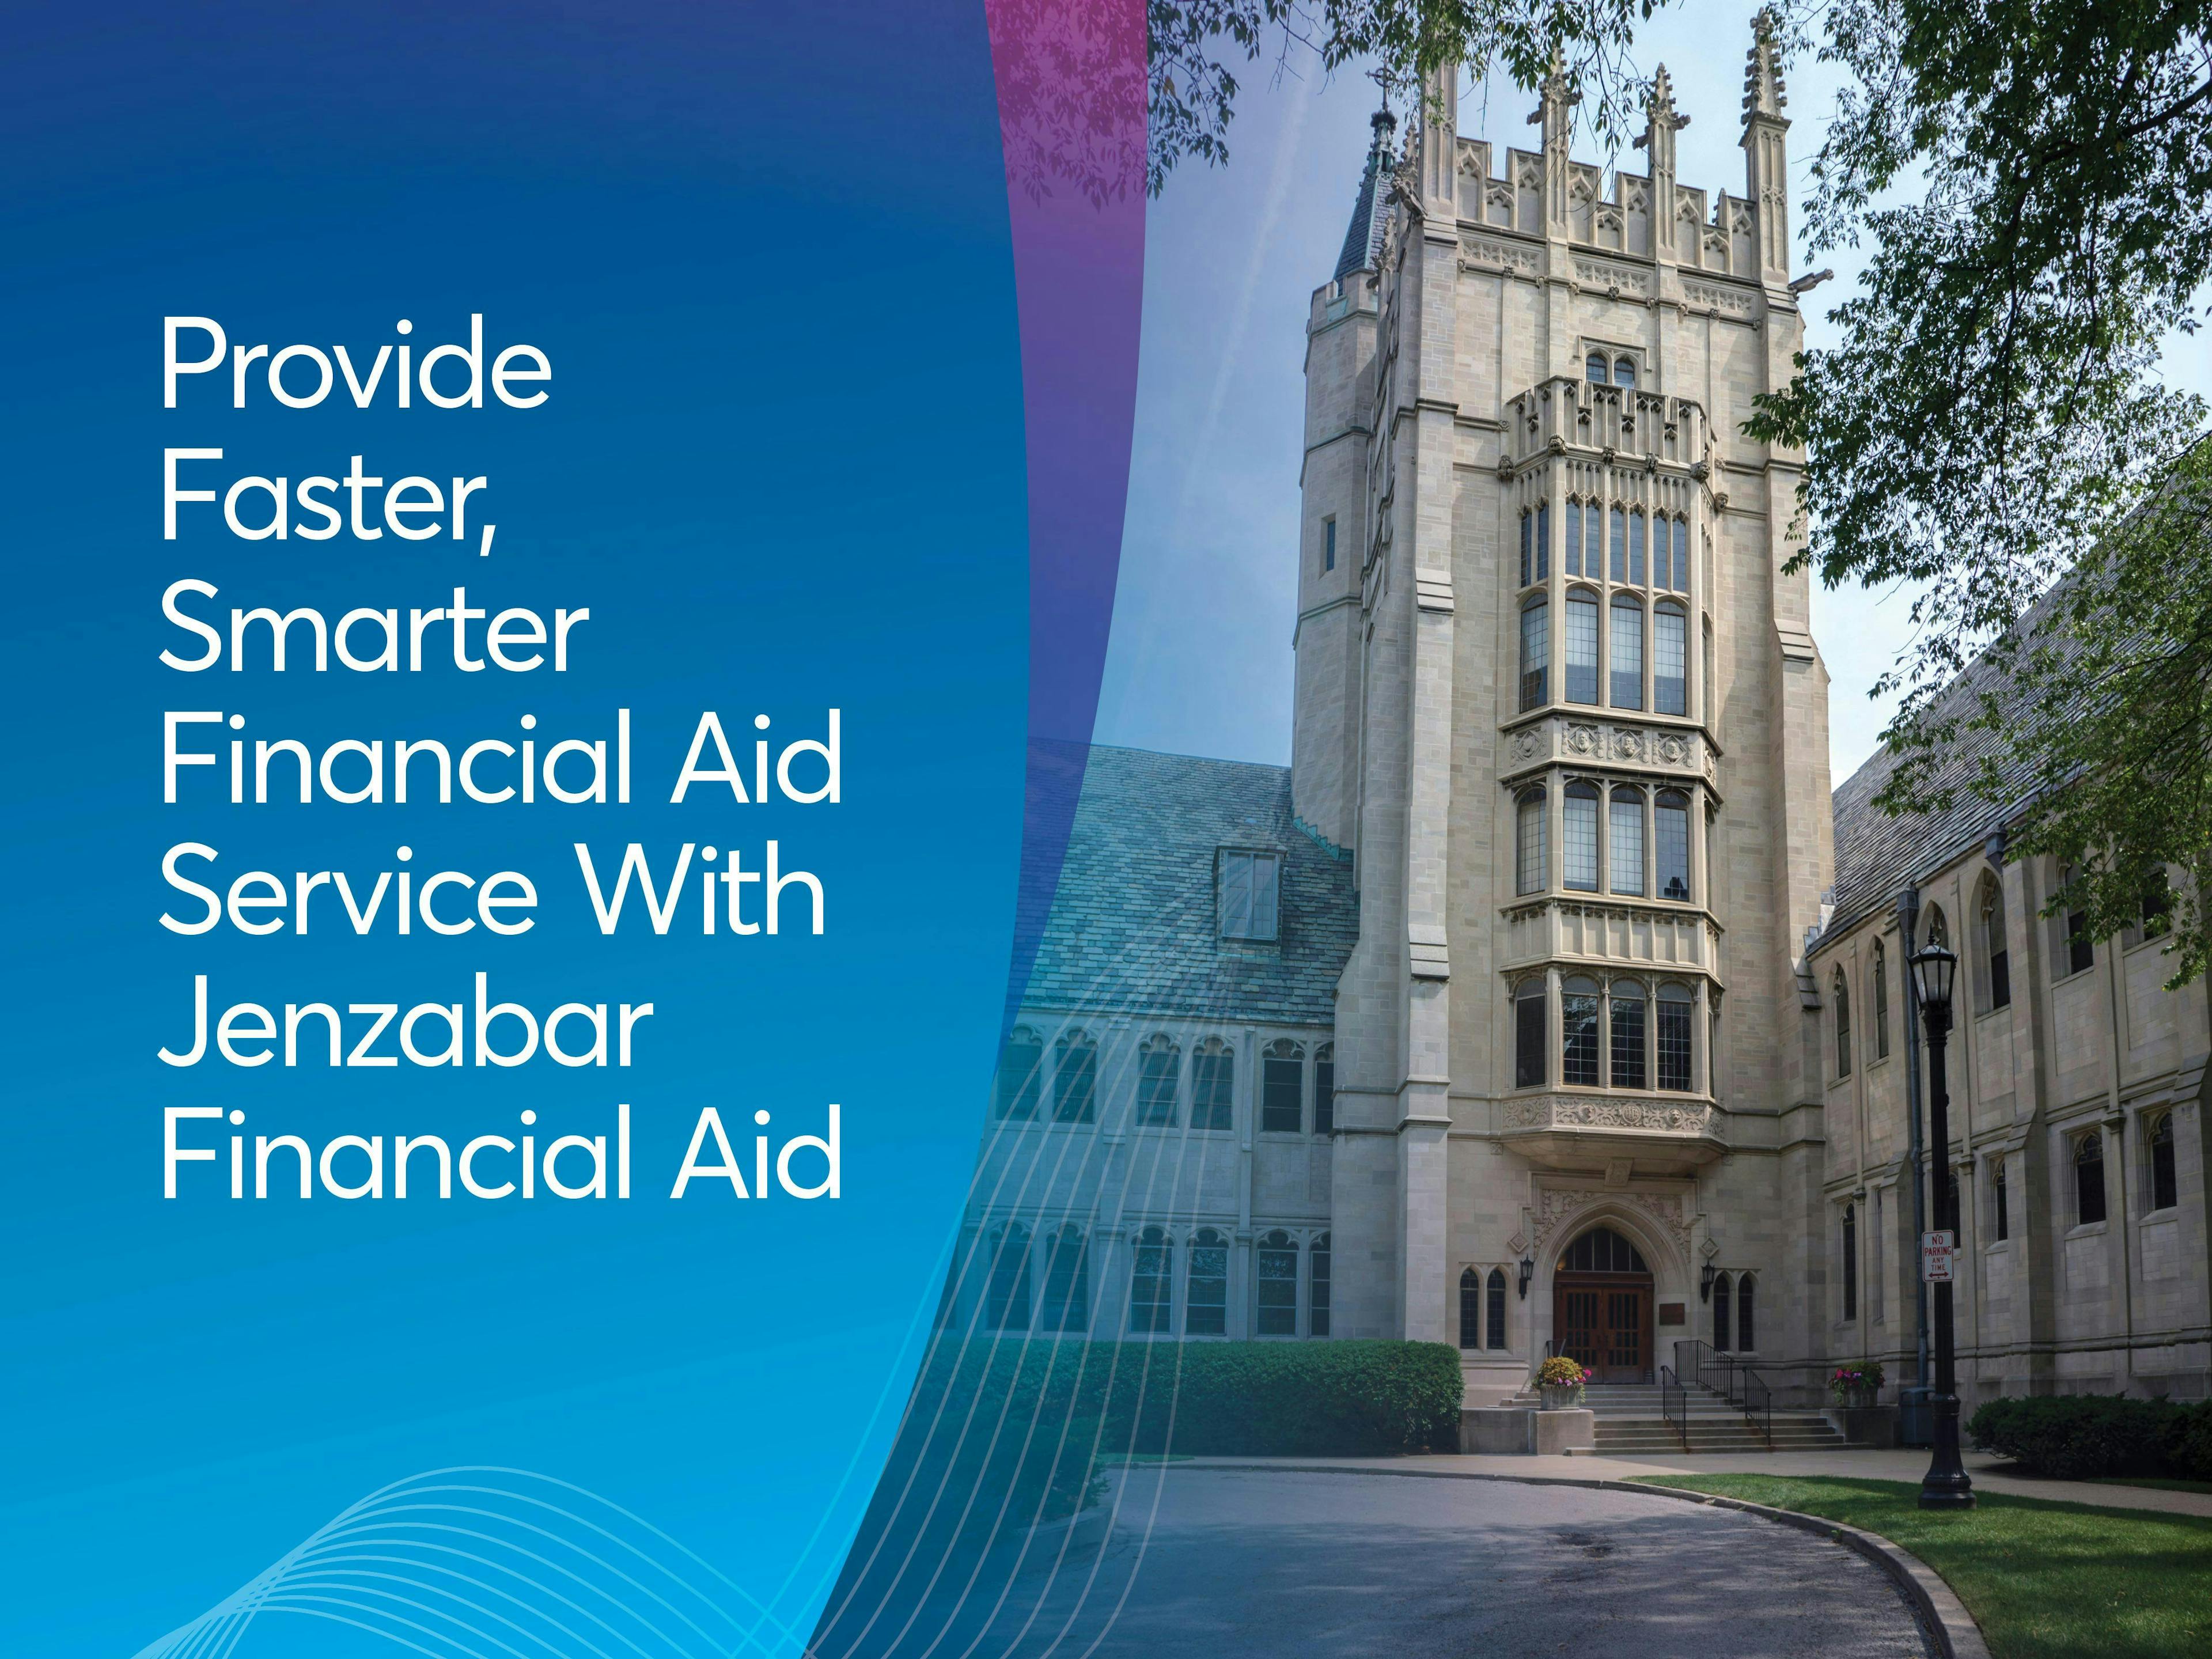 Video: Provide Faster, Smarter Financial Aid Service With Jenzabar Financial Aid